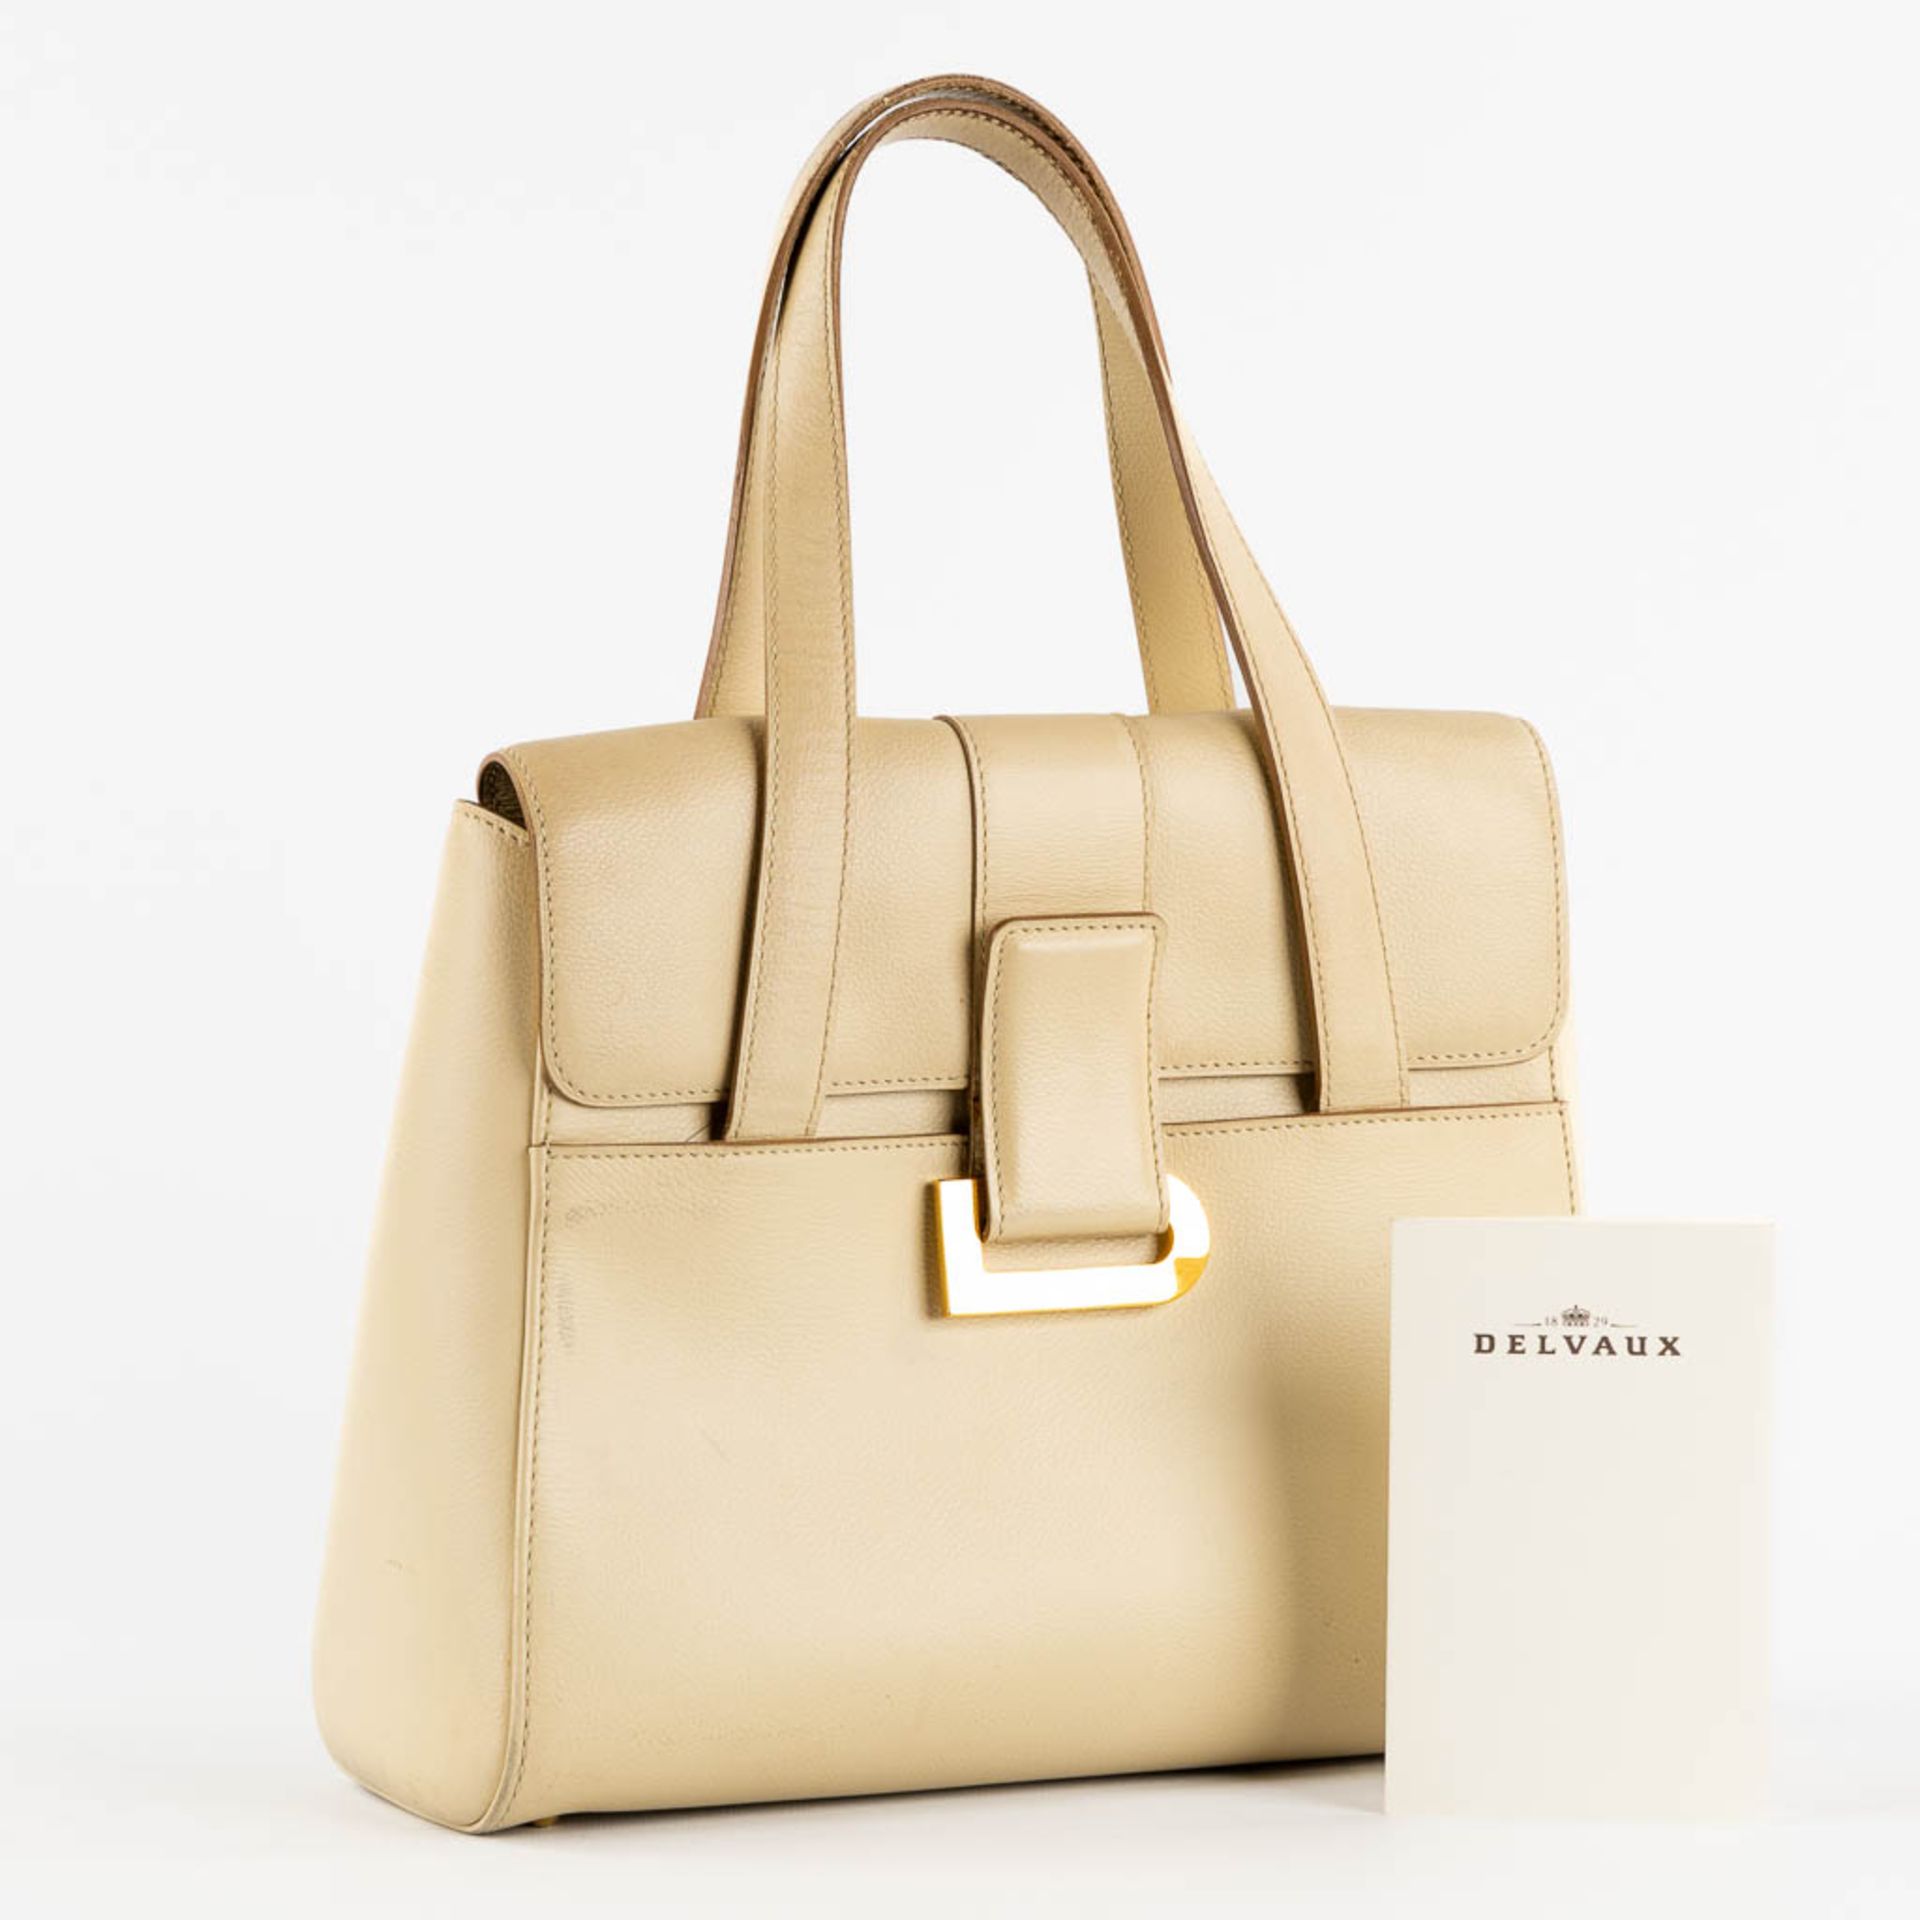 Delvaux model 'Reverie' Jumping, Ivoire. Ivory coloured leather. (L:11 x W:28 x H:23 cm) - Image 3 of 20